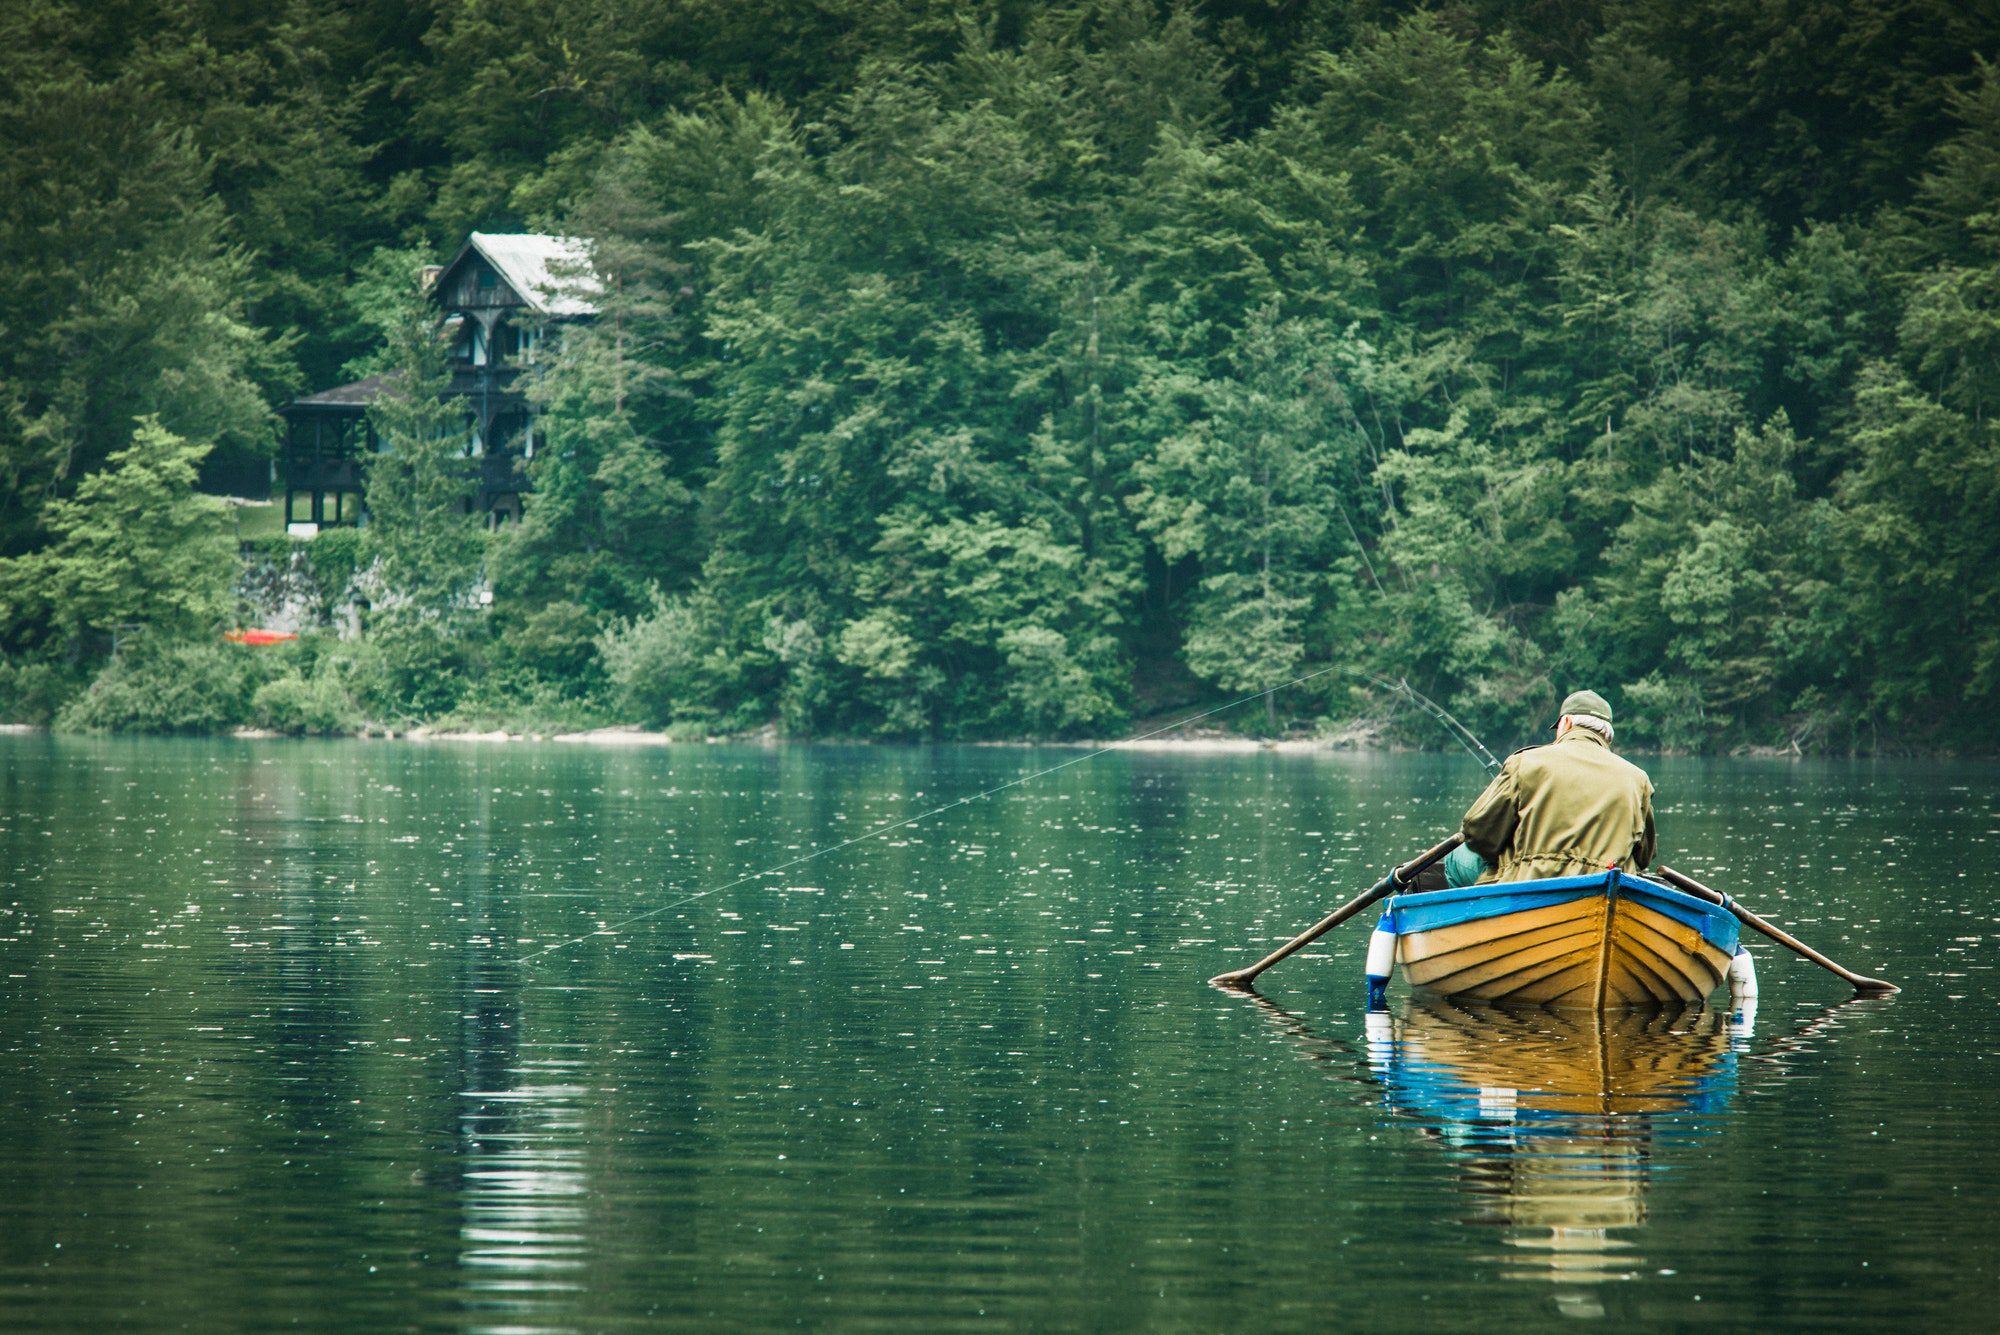 A retiree fishing from a boat at the lake in San Antonio, Texas.